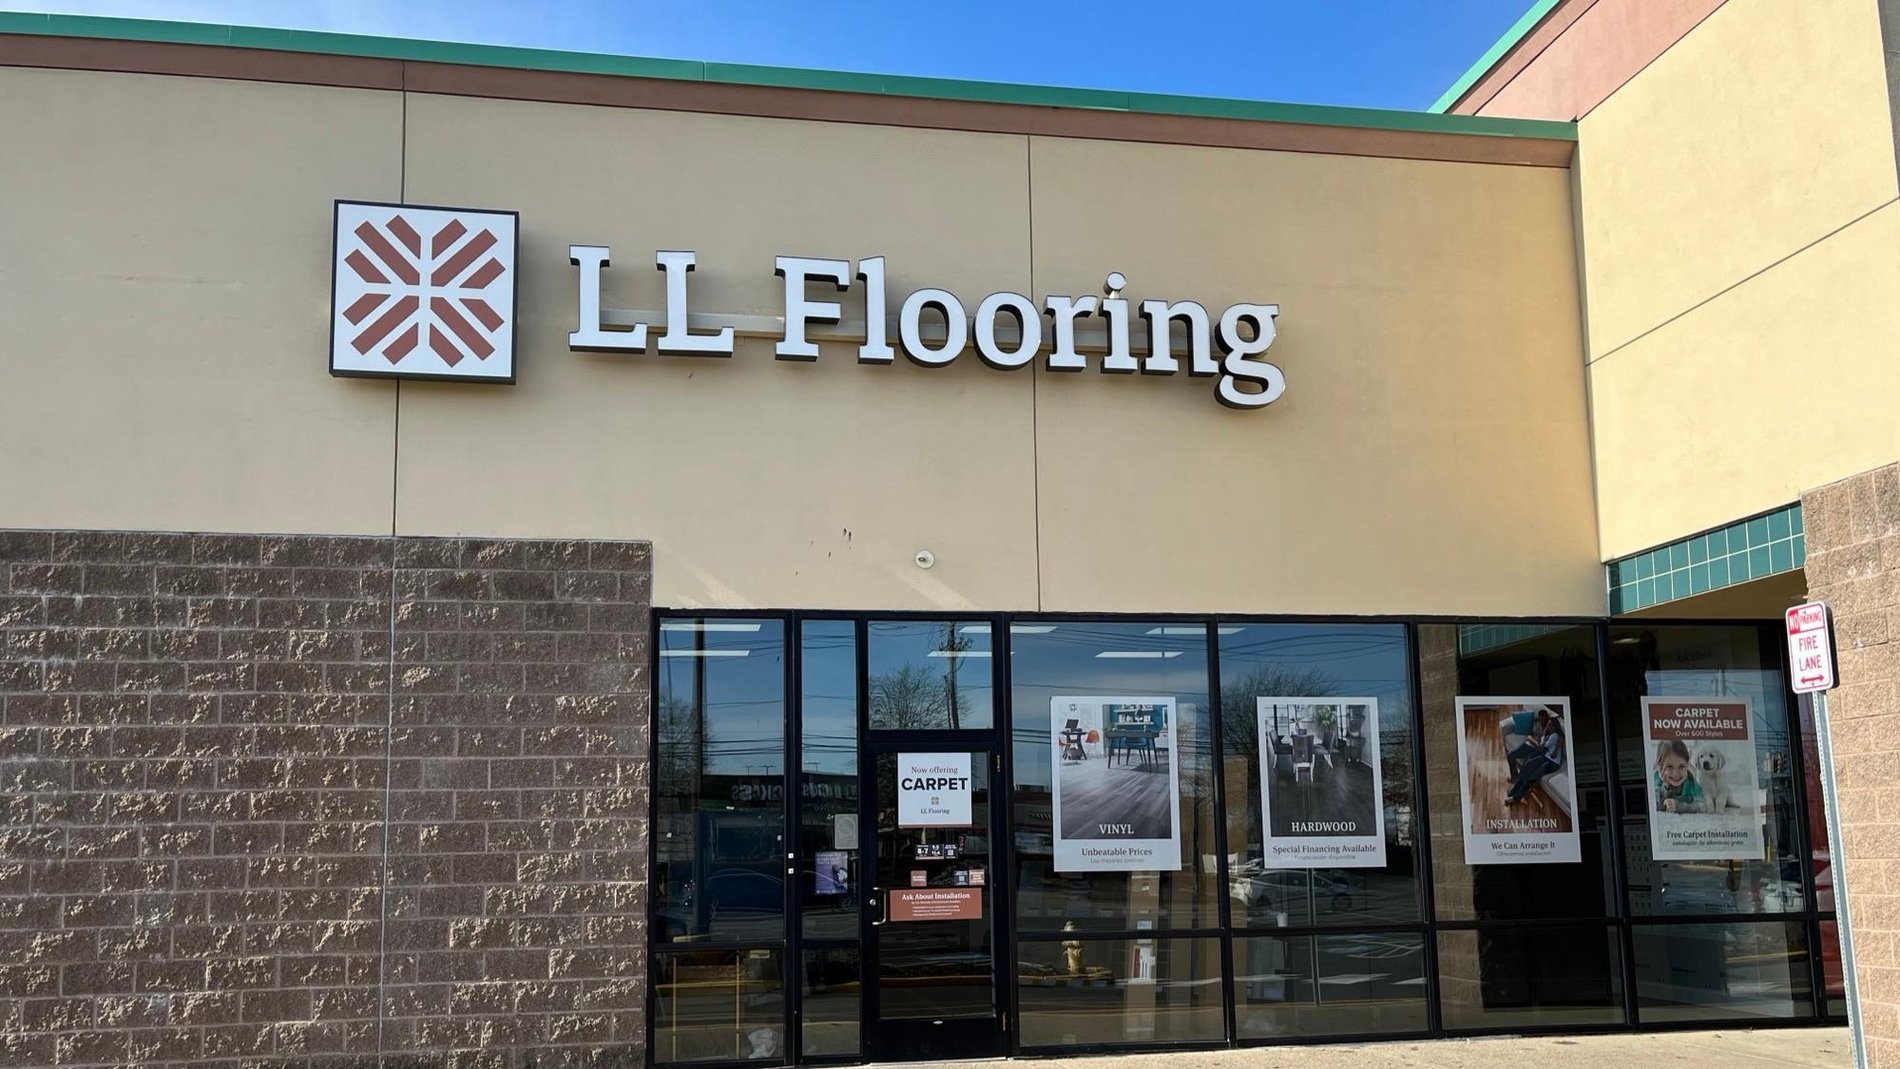 LL Flooring #1232 North Haven | 430 Universal Drive North | Storefront